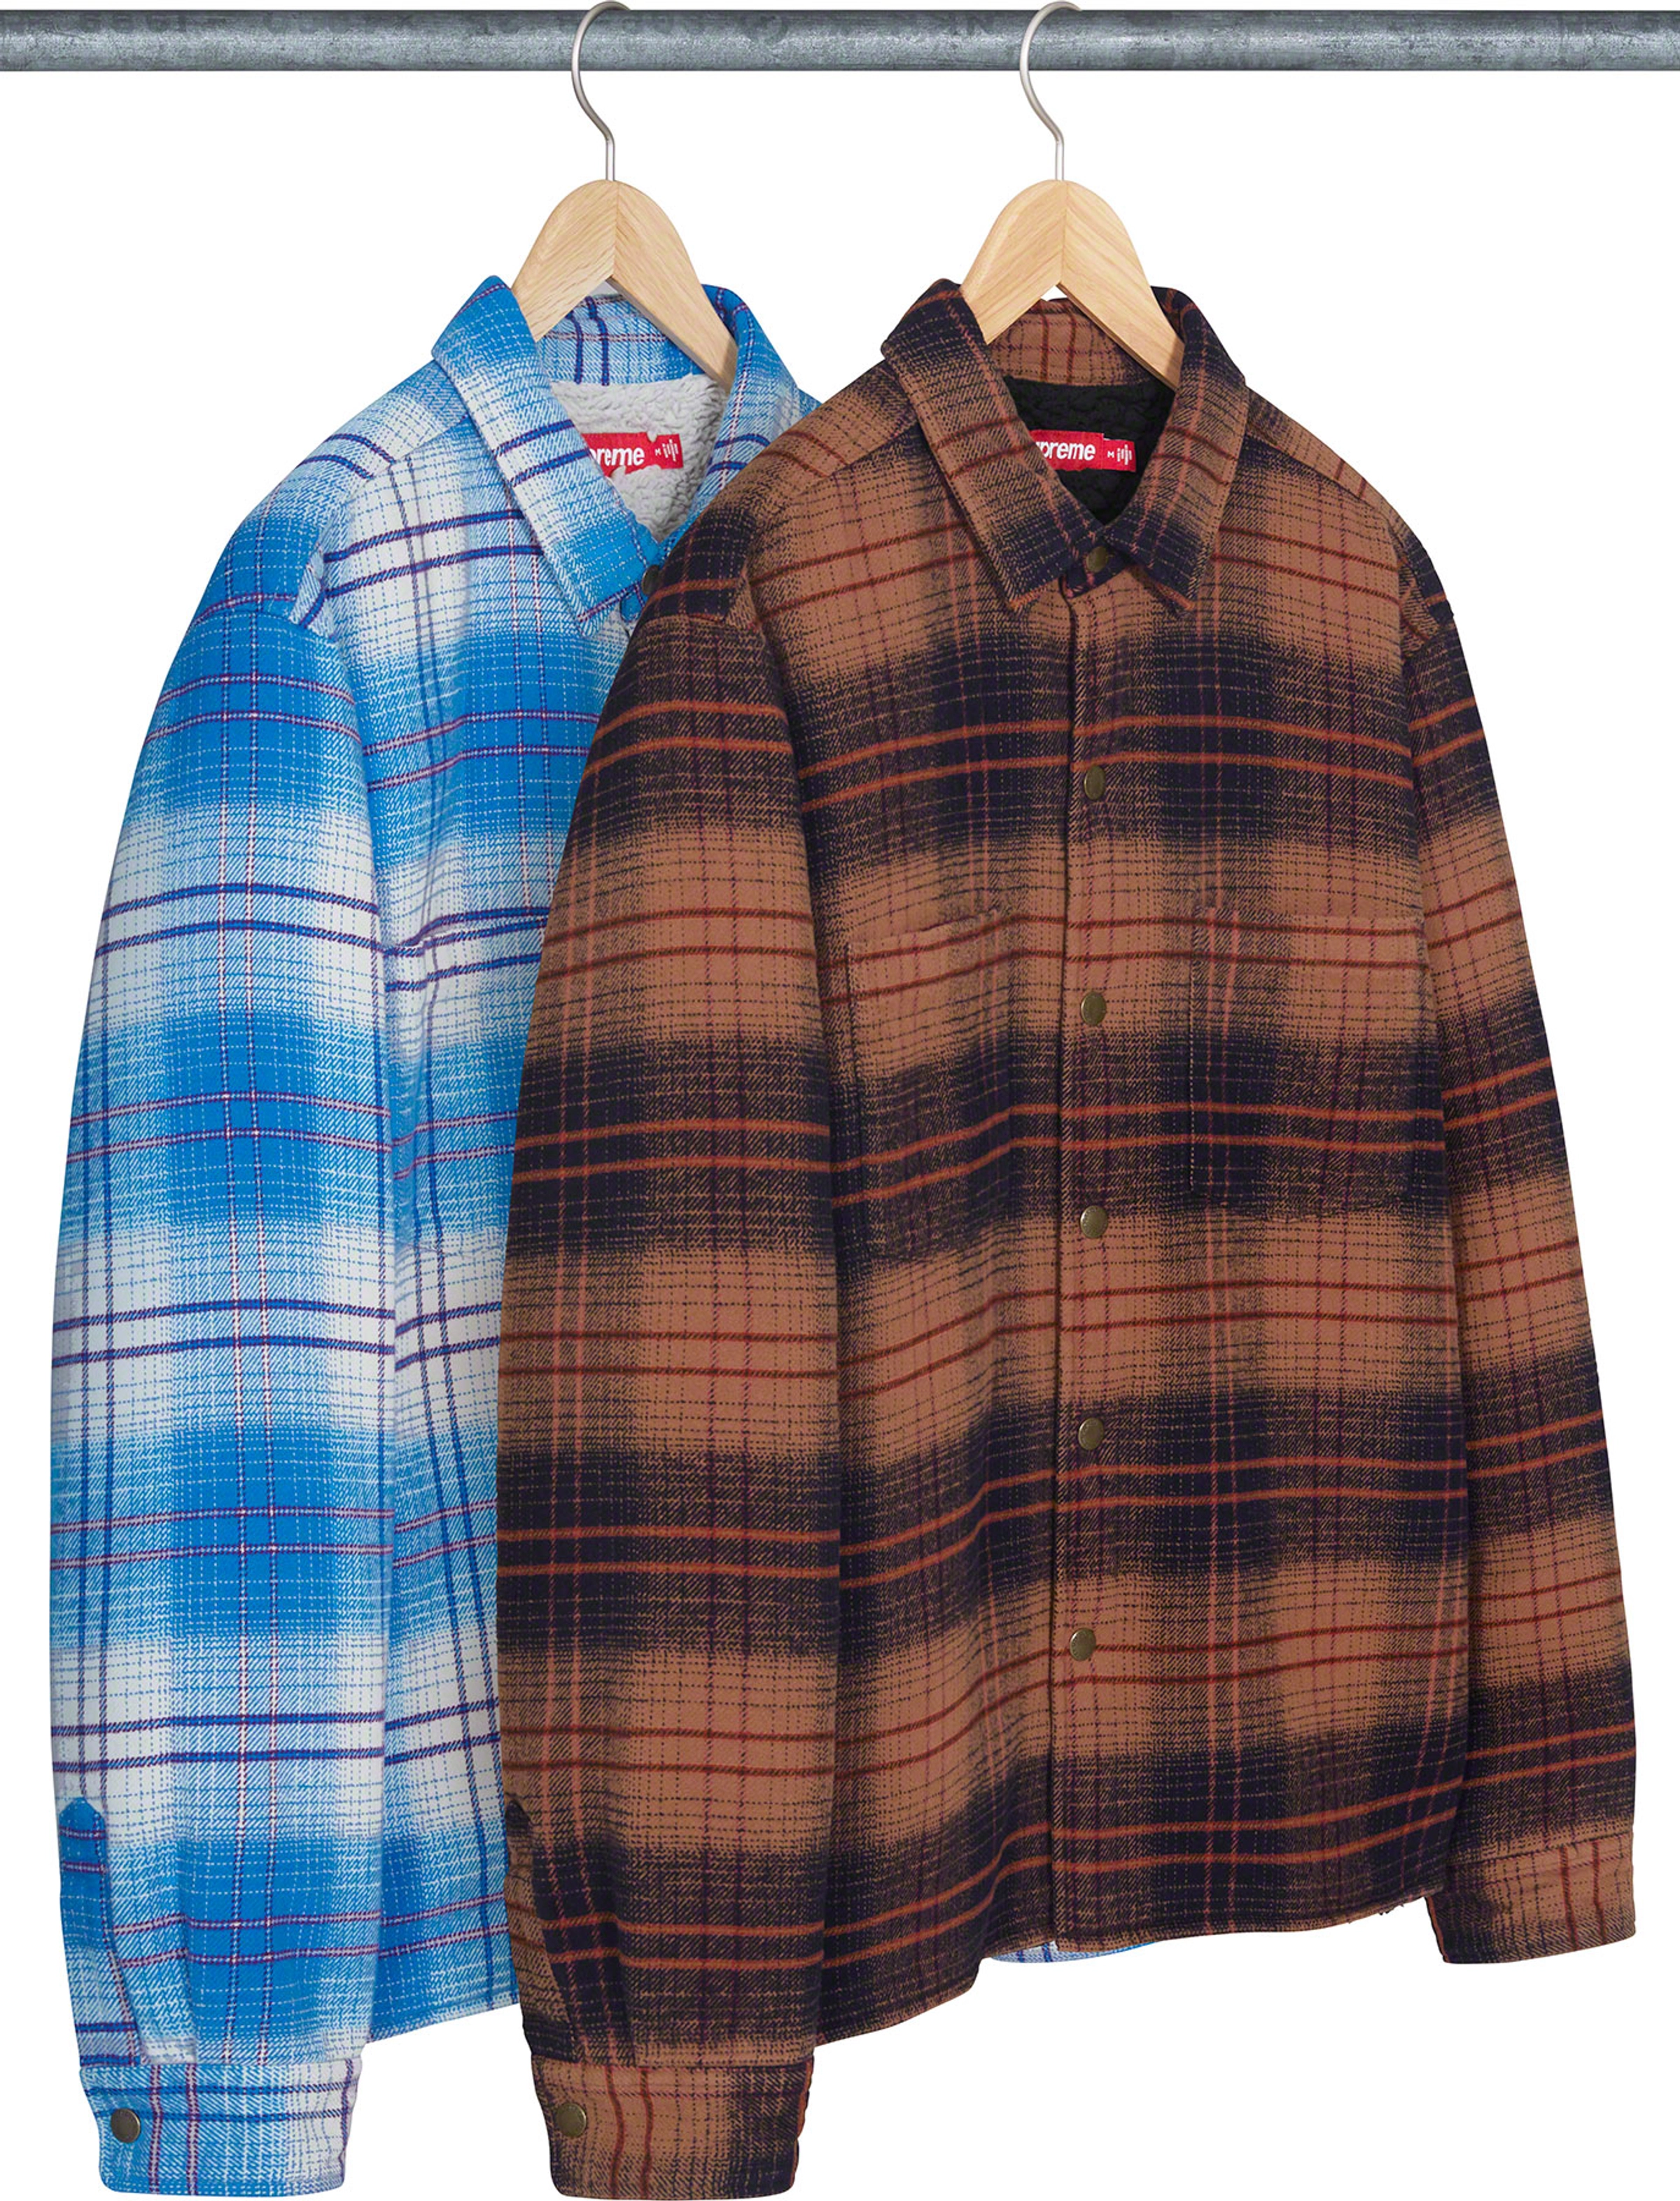 Supreme Lined Flannel Snap Shirt